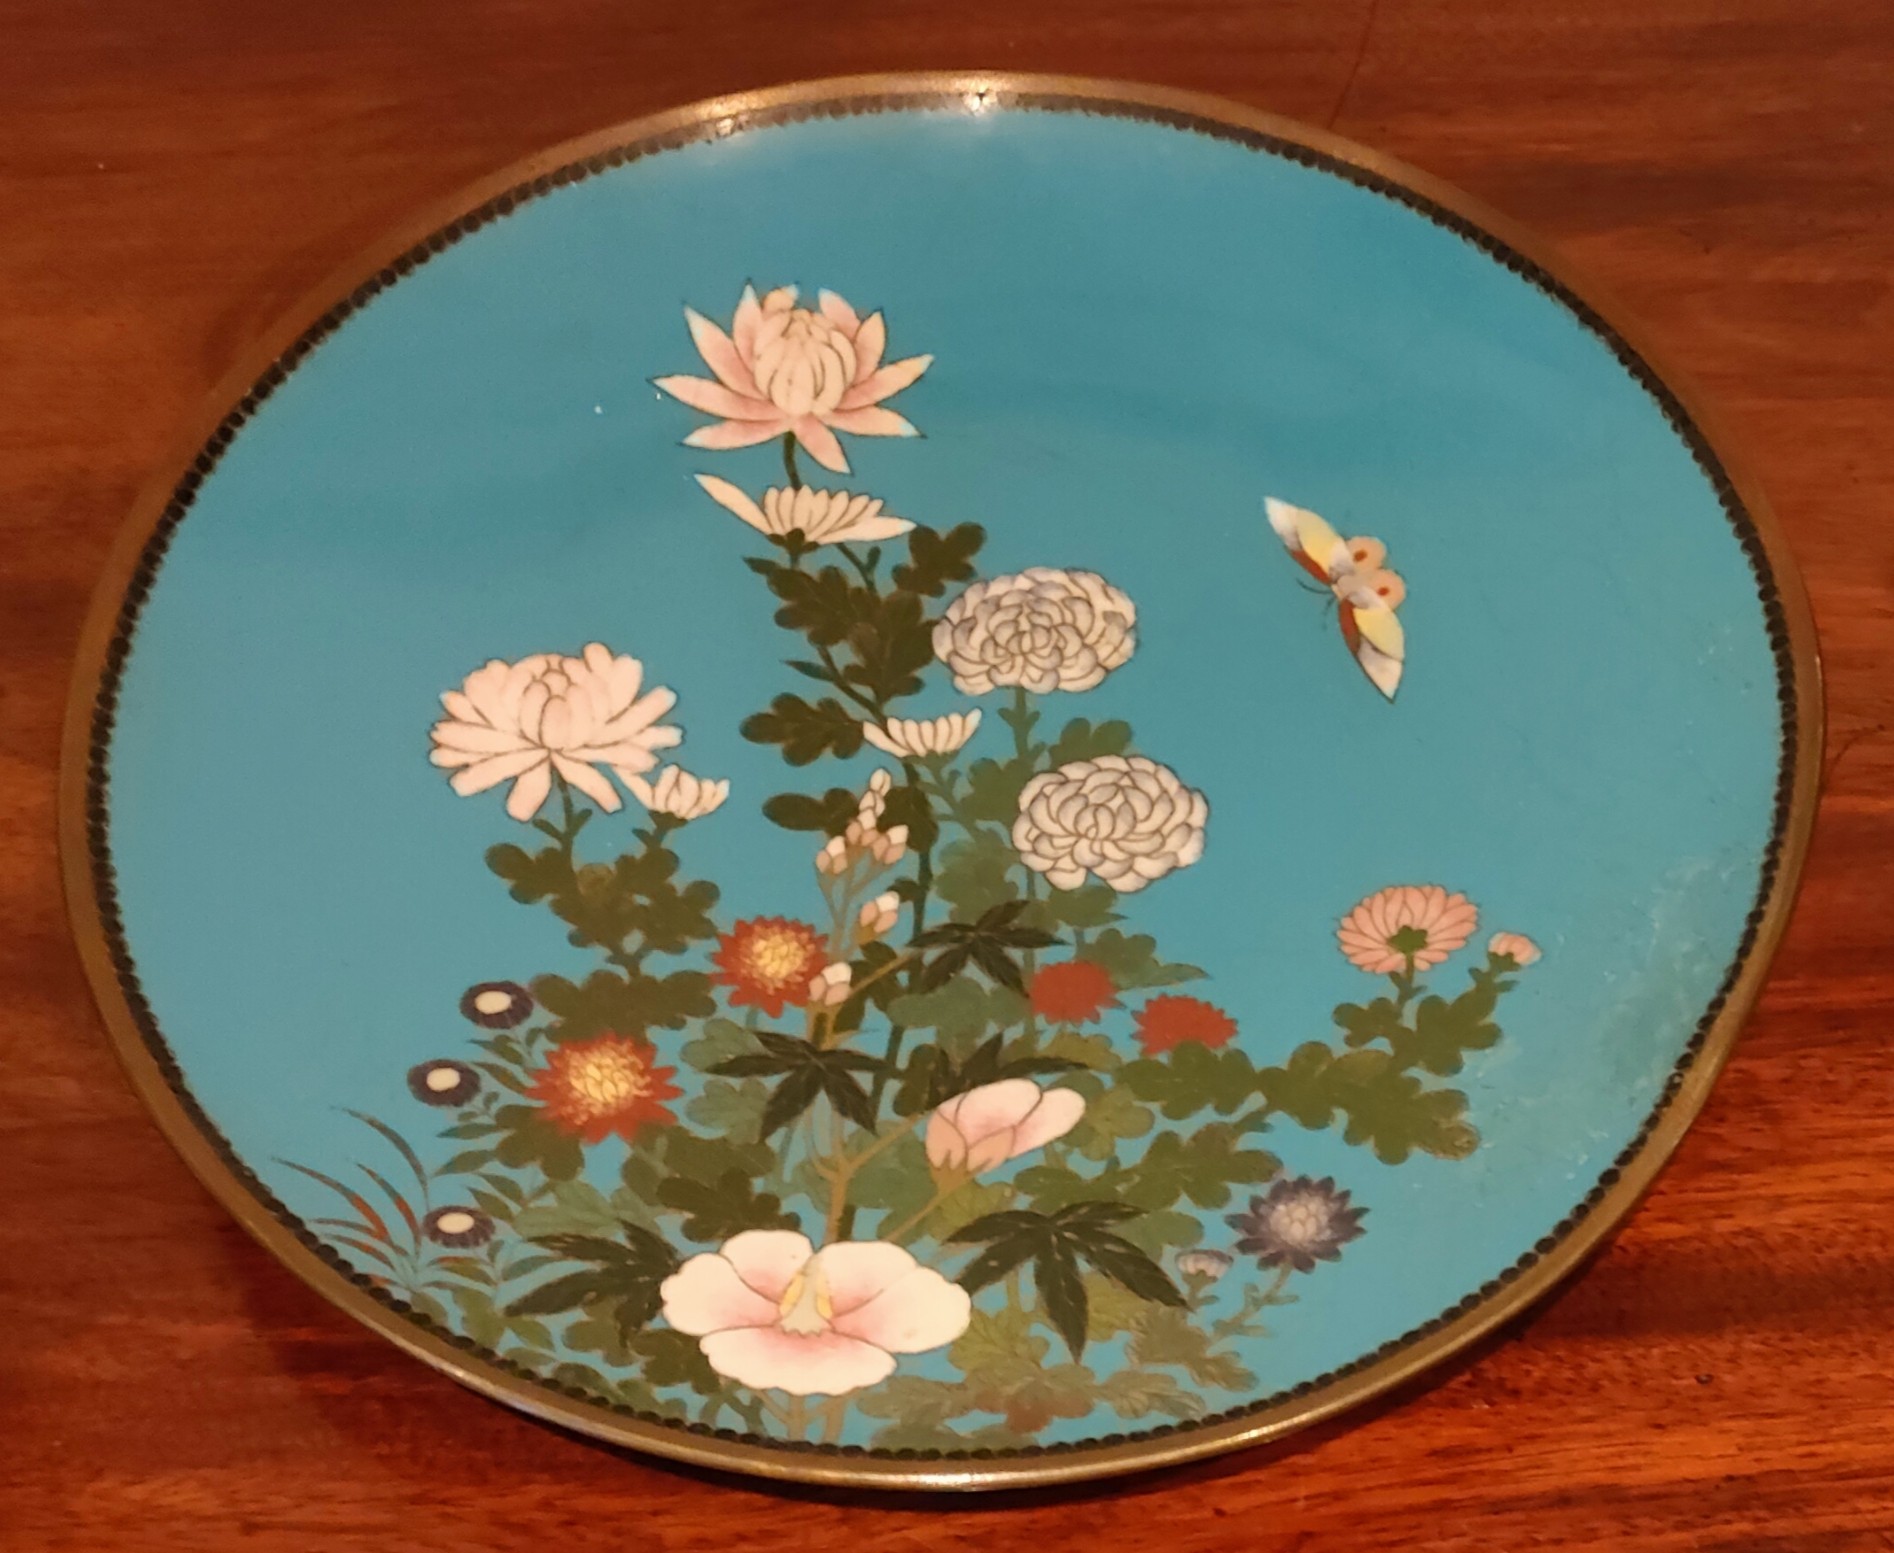 GLAZED CLOISONNE CIRCULAR PLAQUE DECORATED WITH FLOWERS, DIAMETER APPROXIMATELY 30cm USED, SOME